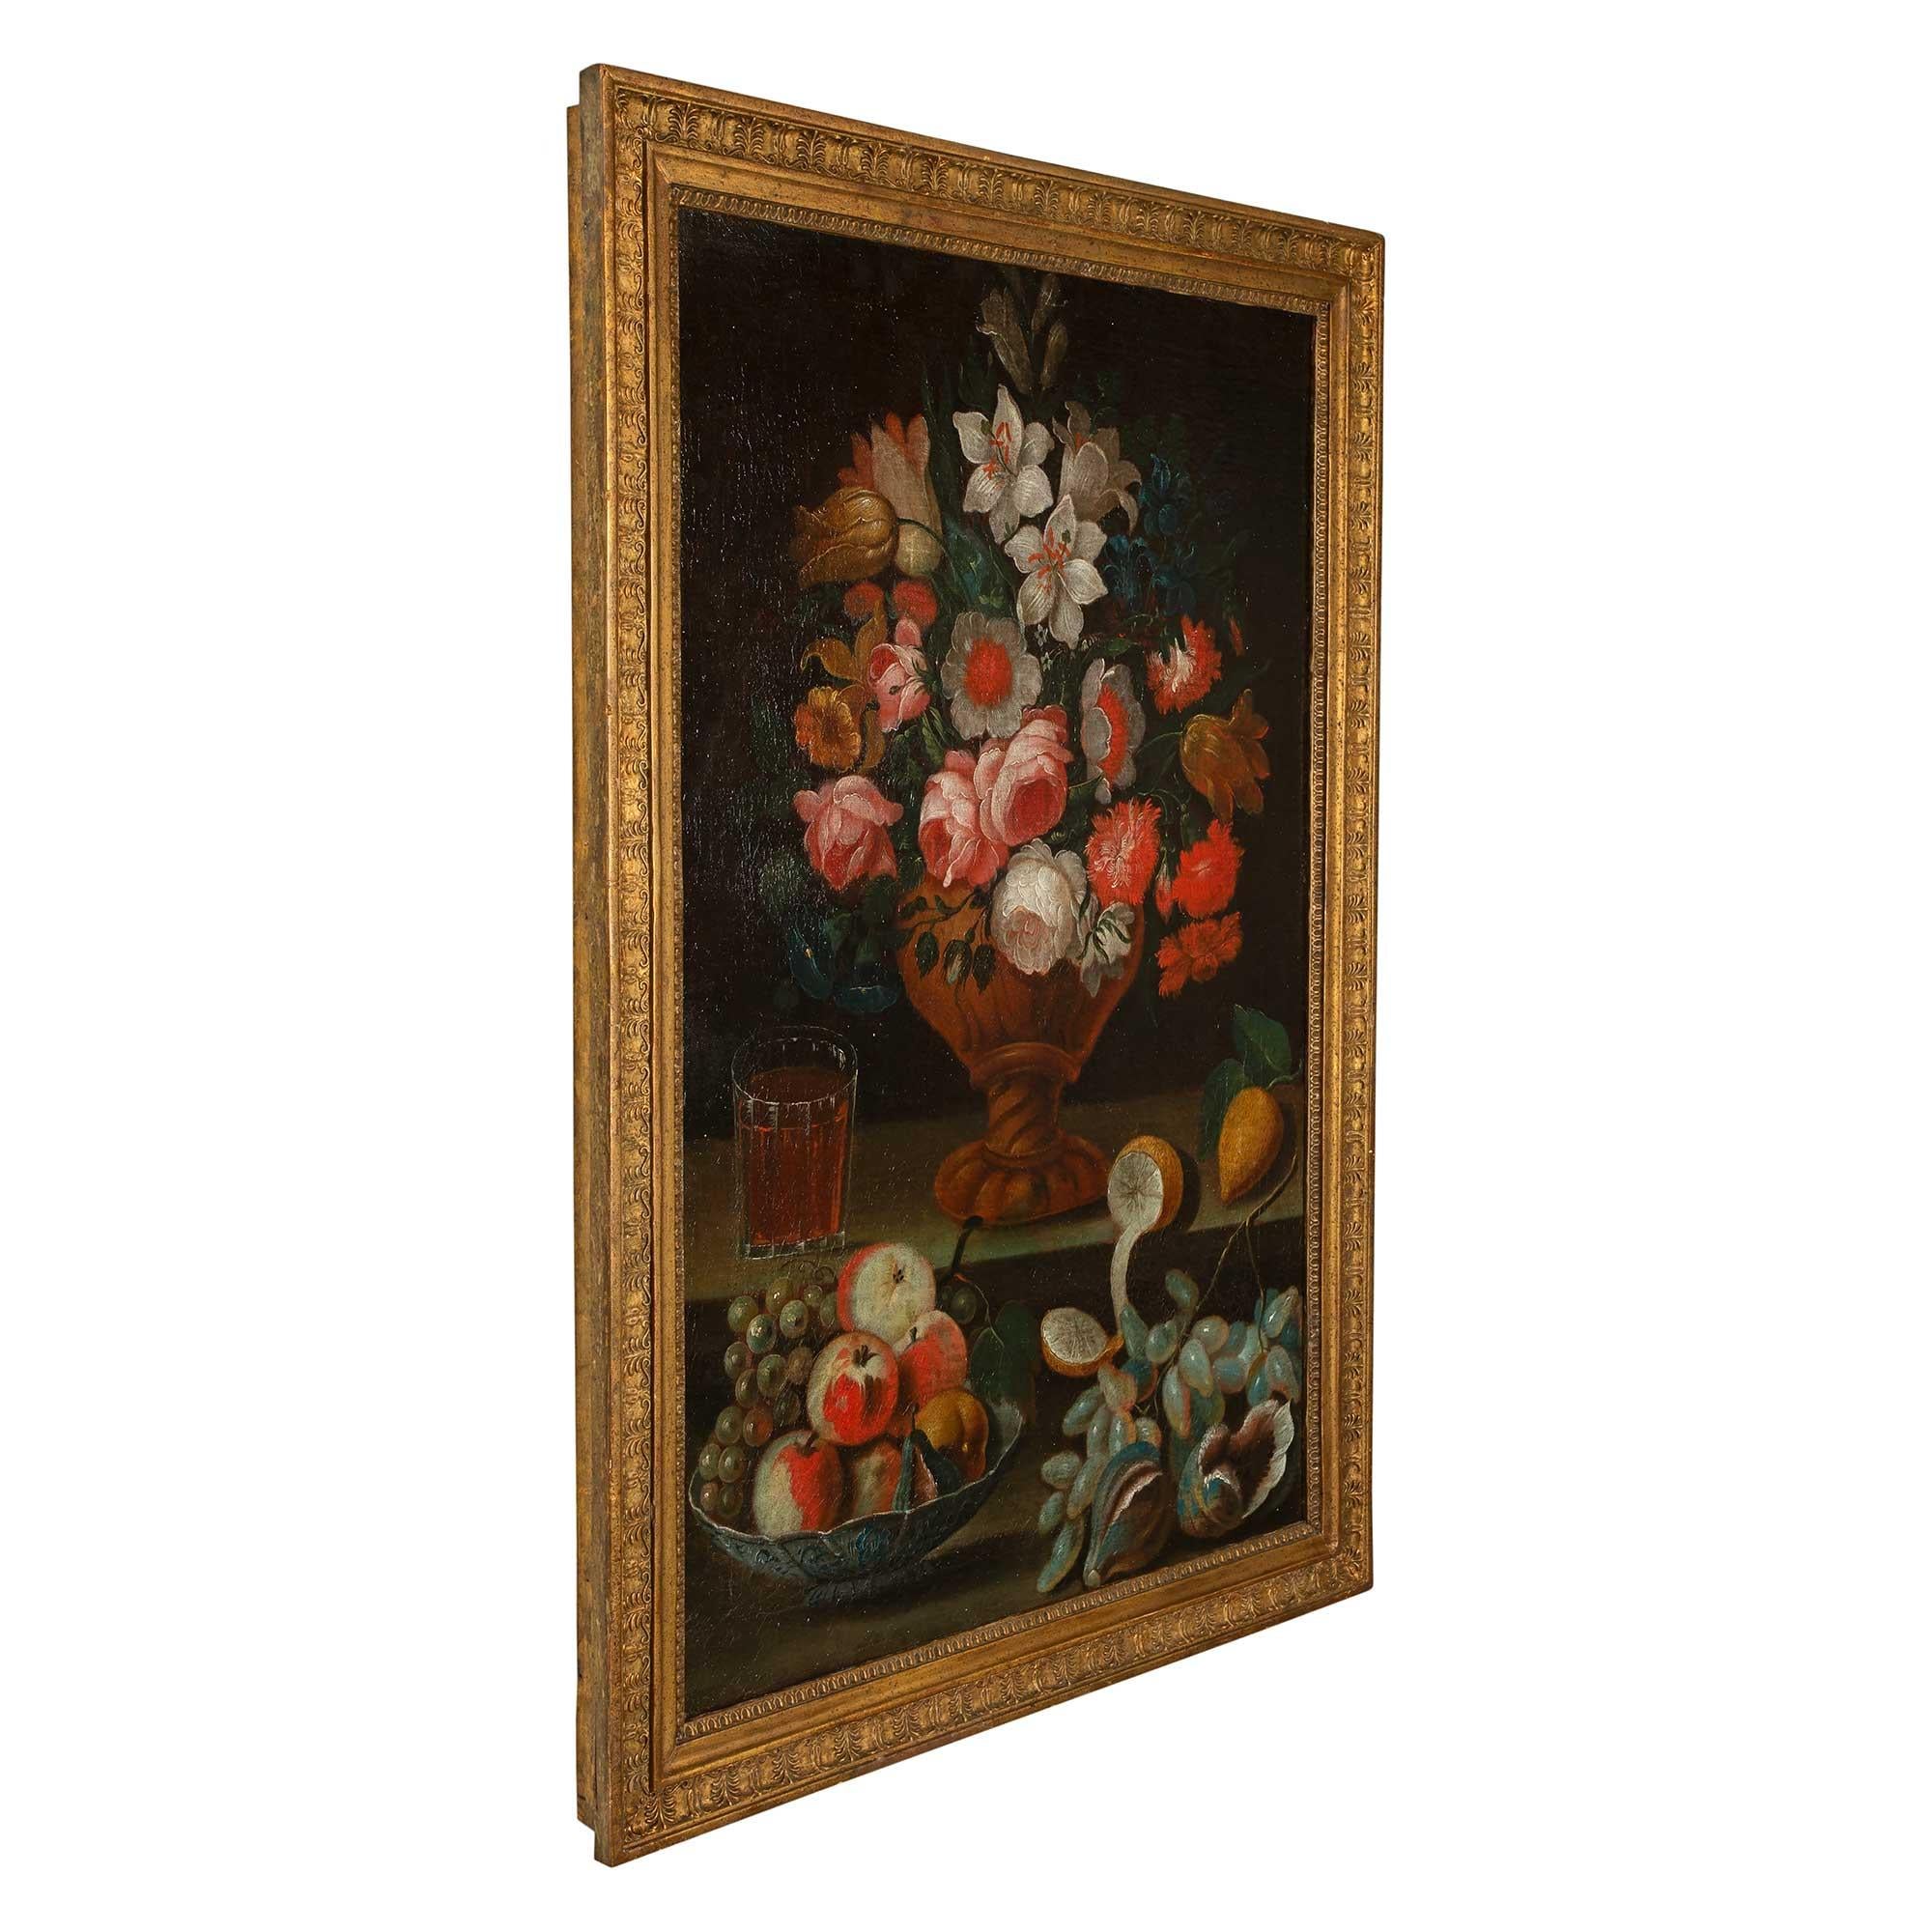 A stunning Italian 17th century oil on canvas still life, from Rome. The painting depicts a beautiful fruit bowl and grapes in the foreground and wonderfully executed bouquet of flowers with outstanding vivid colors. Next to it is a full glass of an